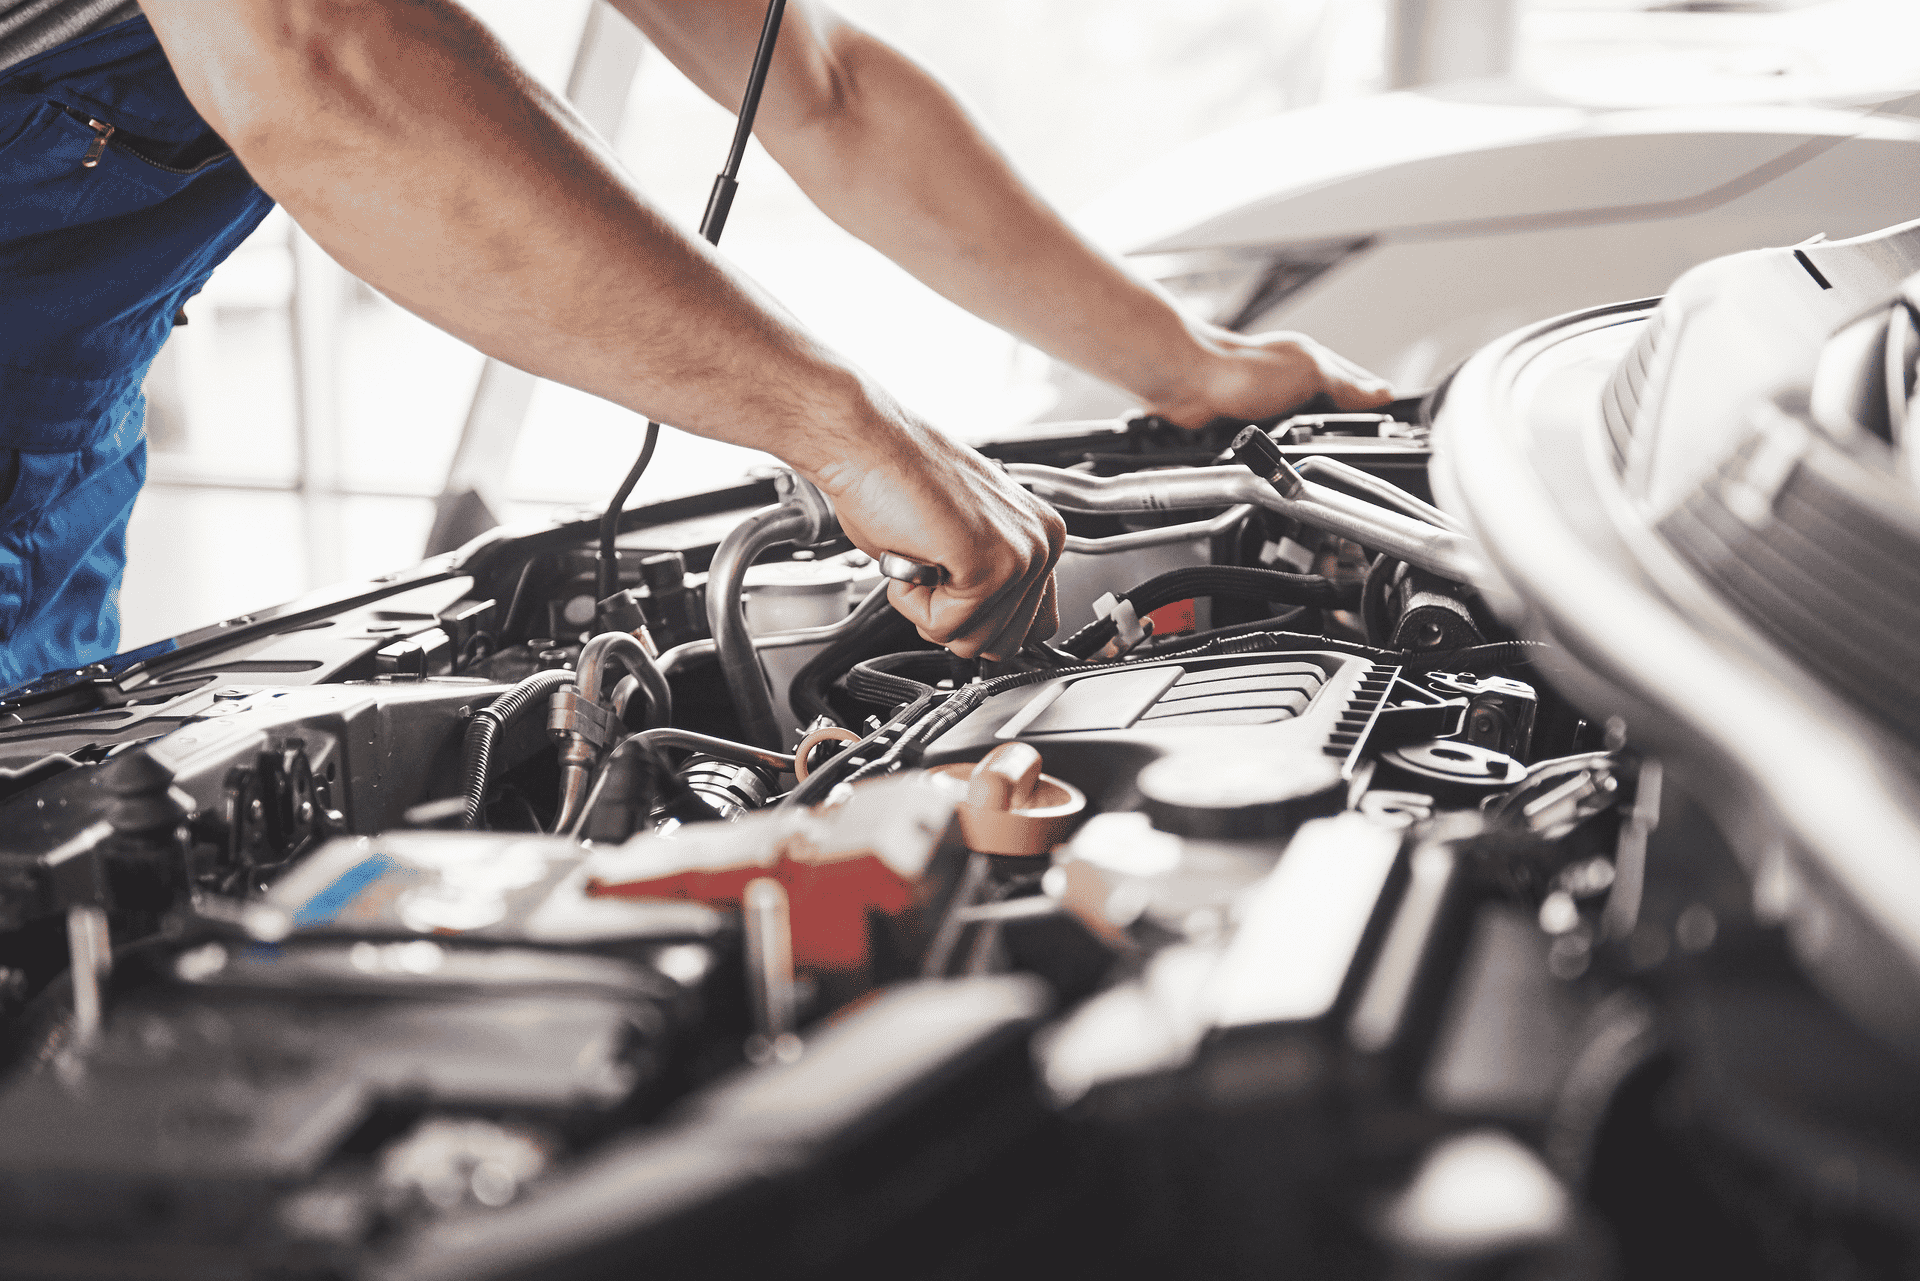 How to Know When Your Engine Needs Maintenance